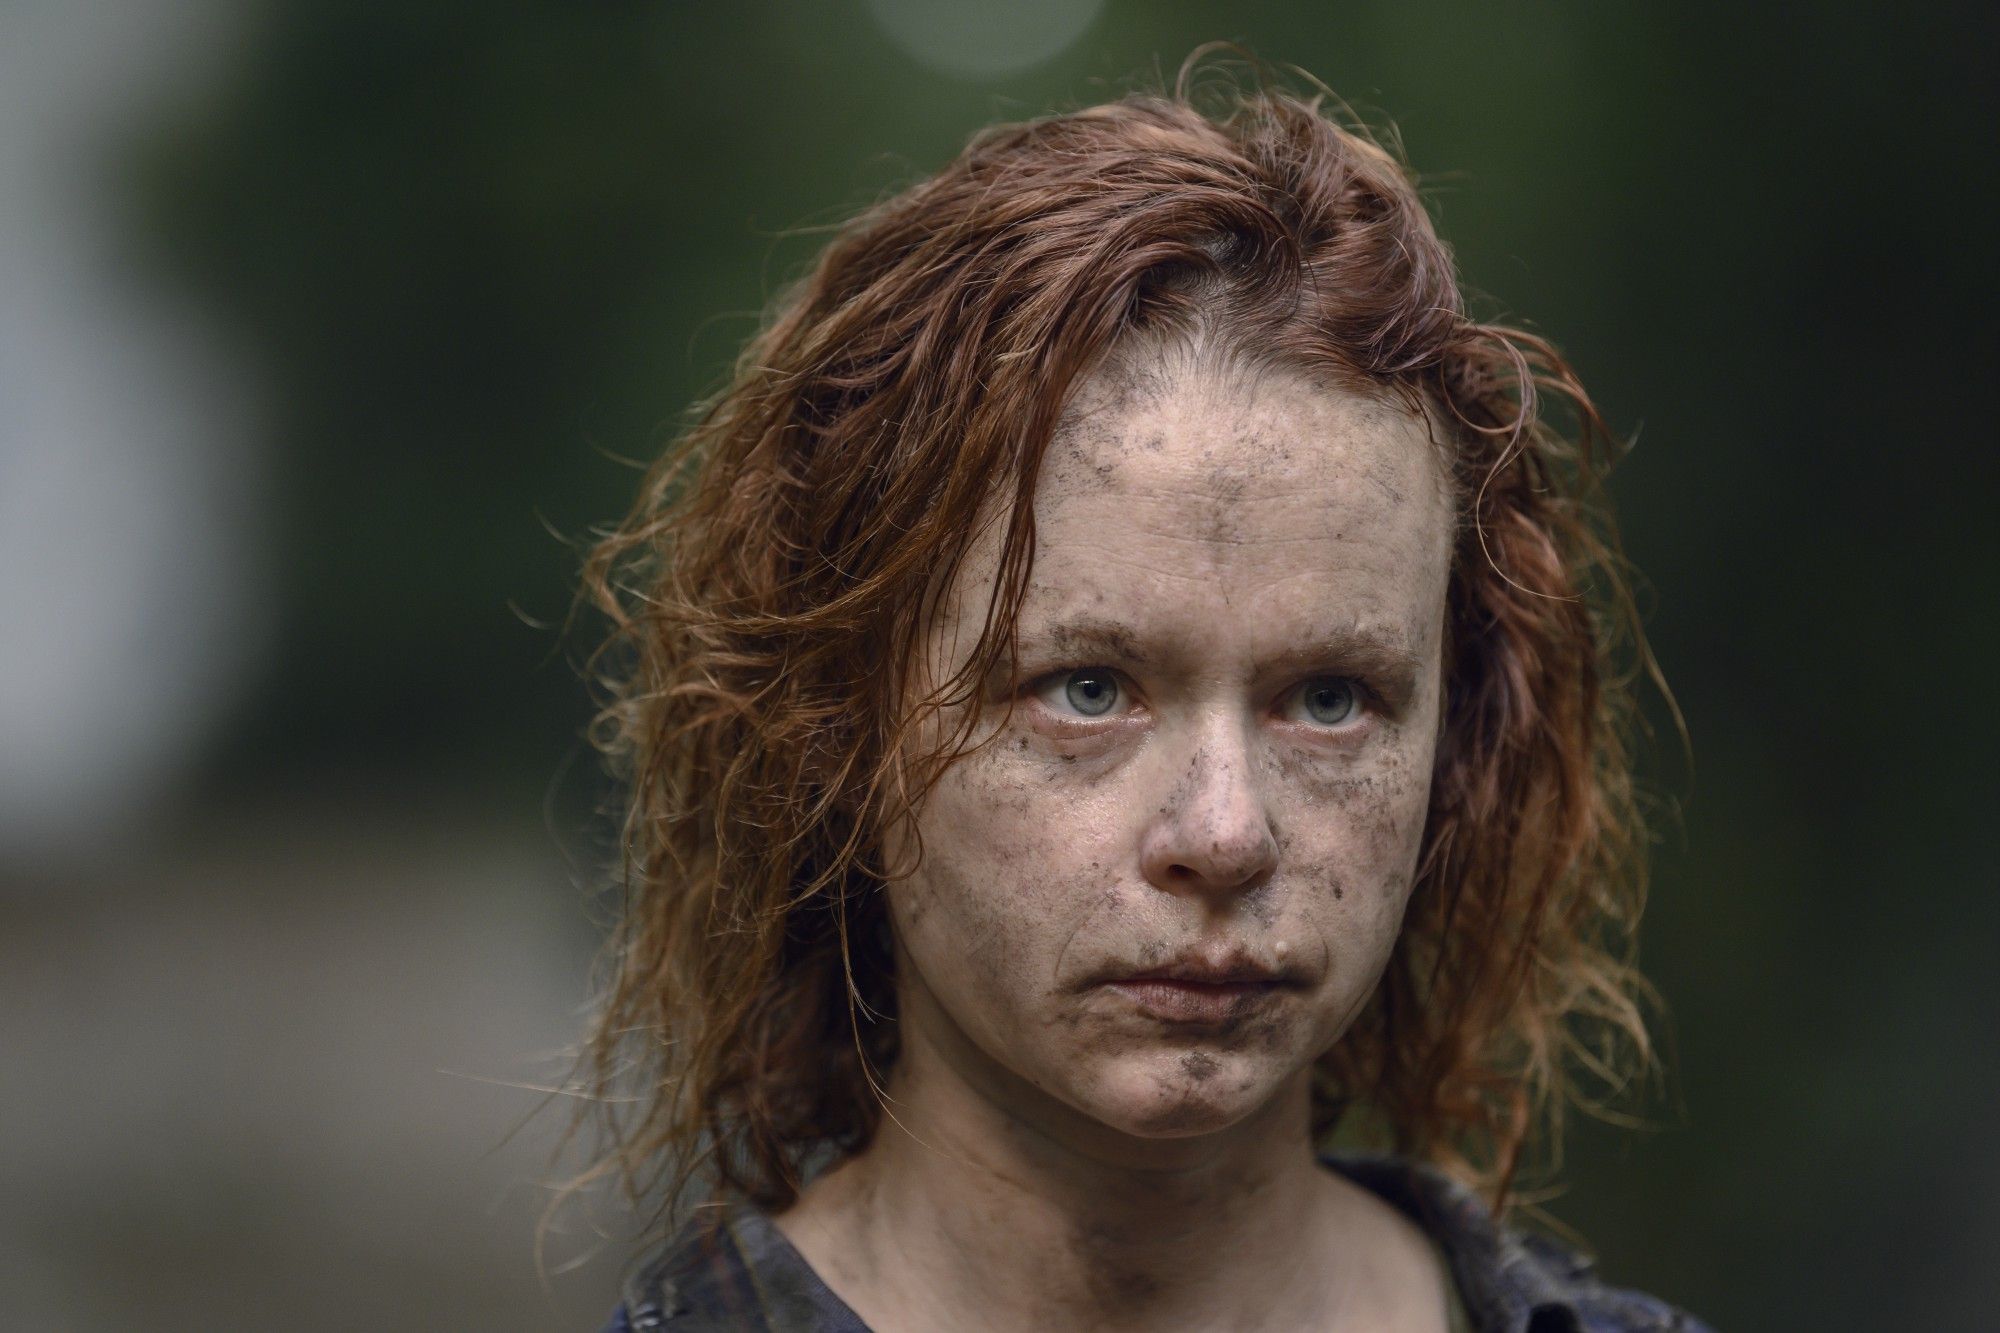 The Walking Dead Season 10 Images Reveal Thora Birch S Gamma Images, Photos, Reviews